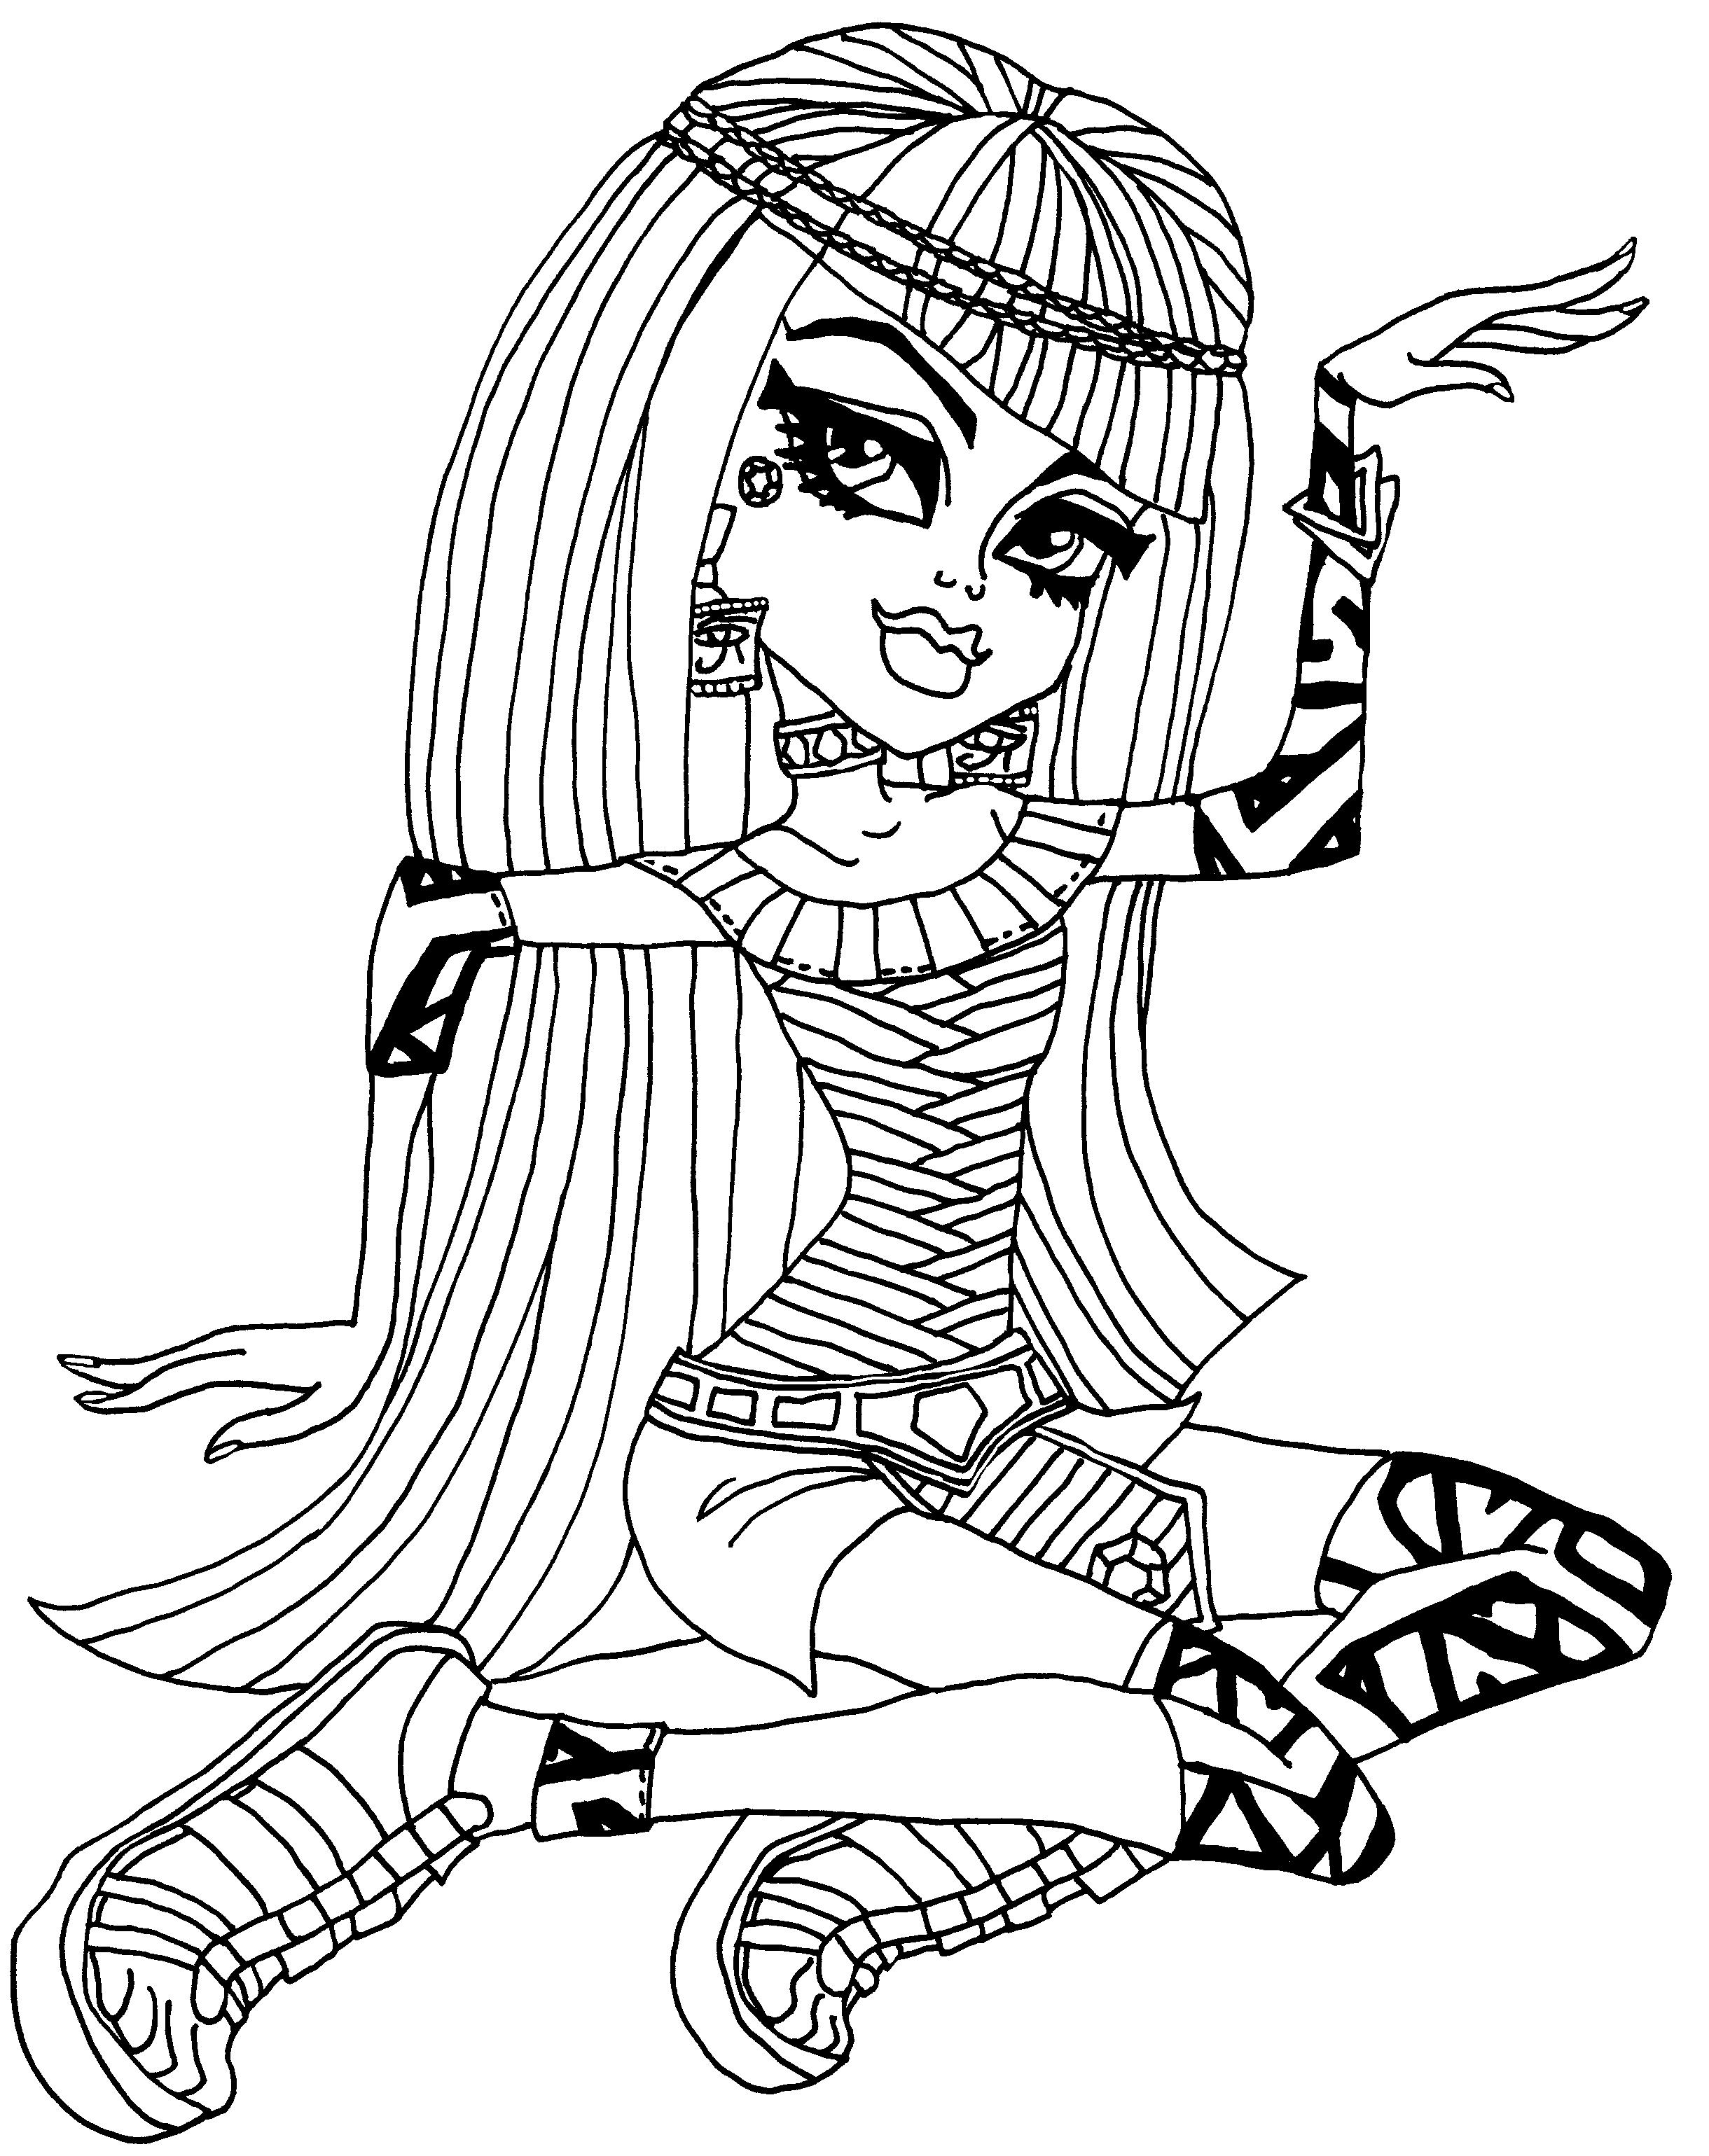 Download Monster high for kids - Monster High Kids Coloring Pages